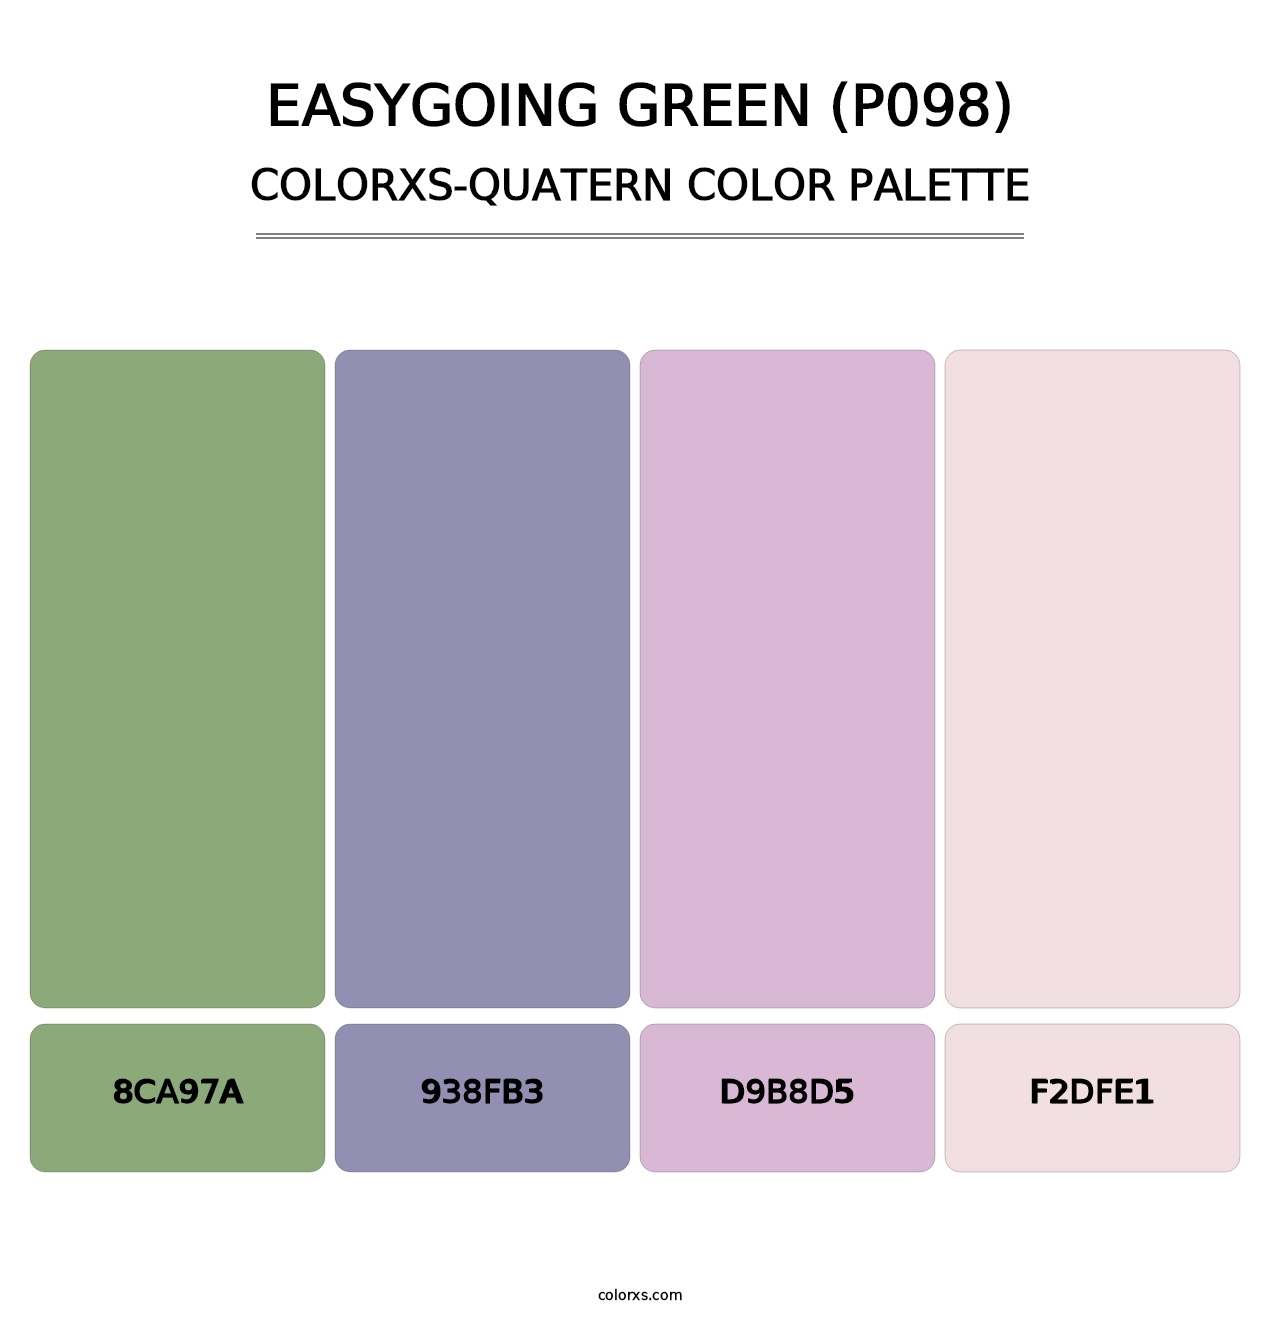 Easygoing Green (P098) - Colorxs Quatern Palette